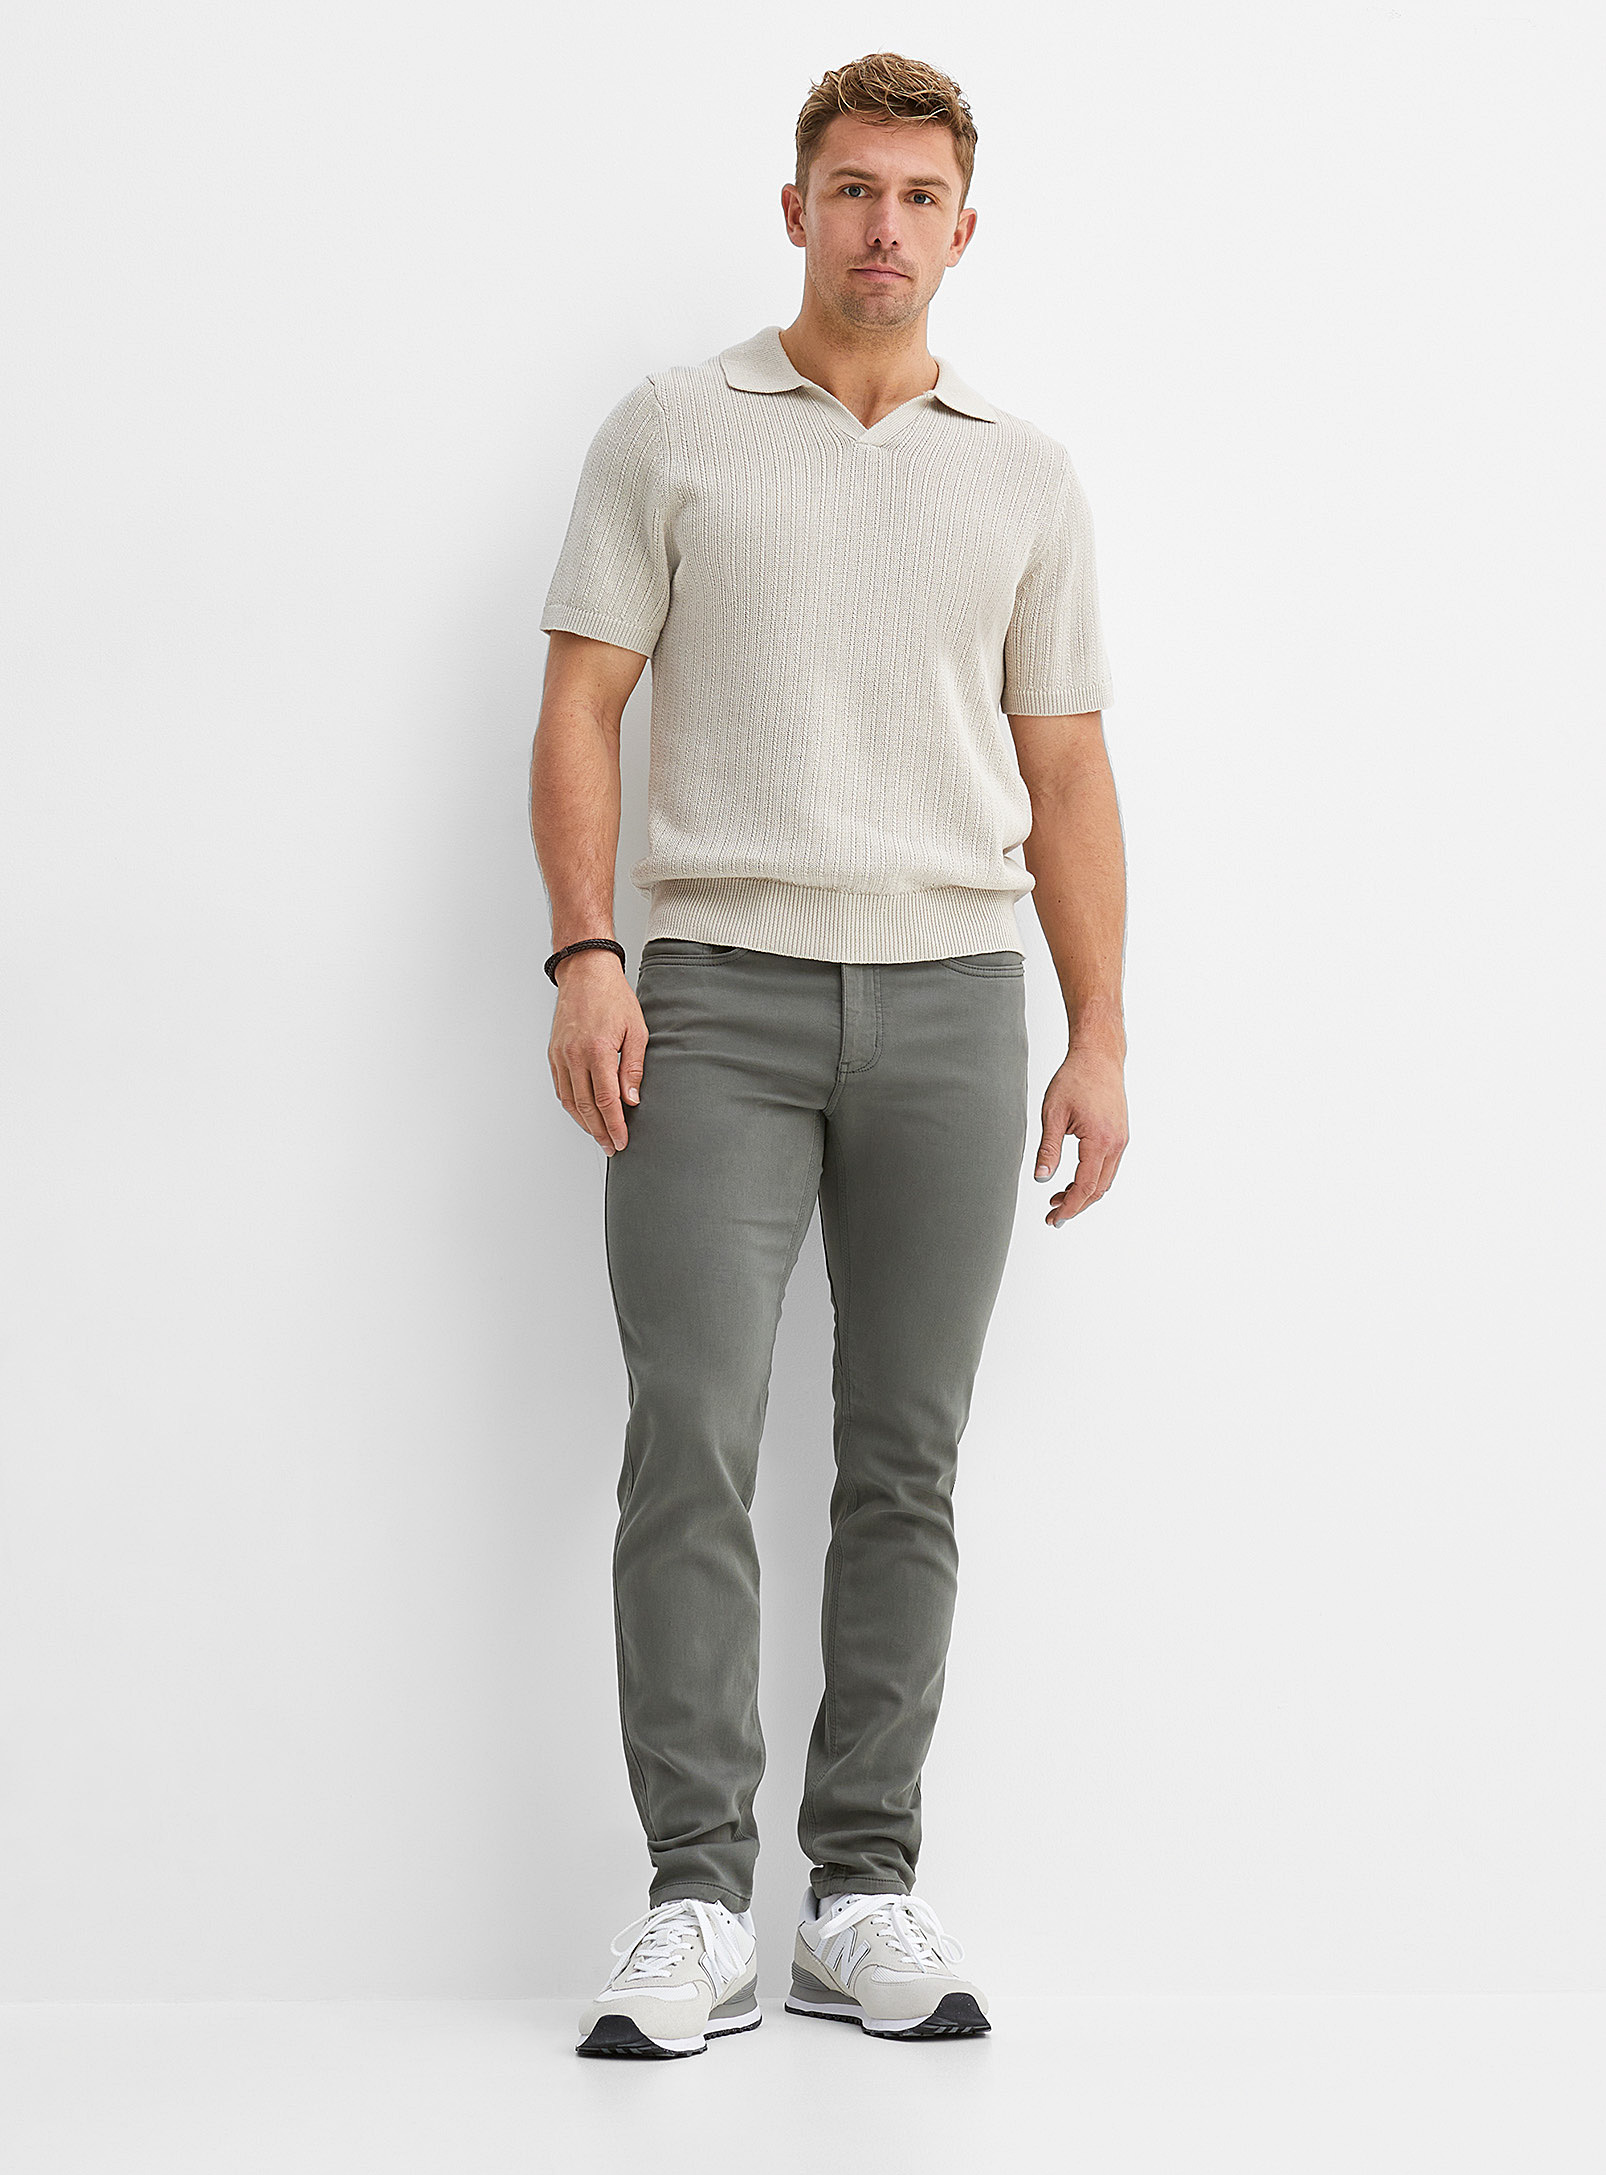 Duer No Sweat 5-pocket Pant Slim Fit In Charcoal